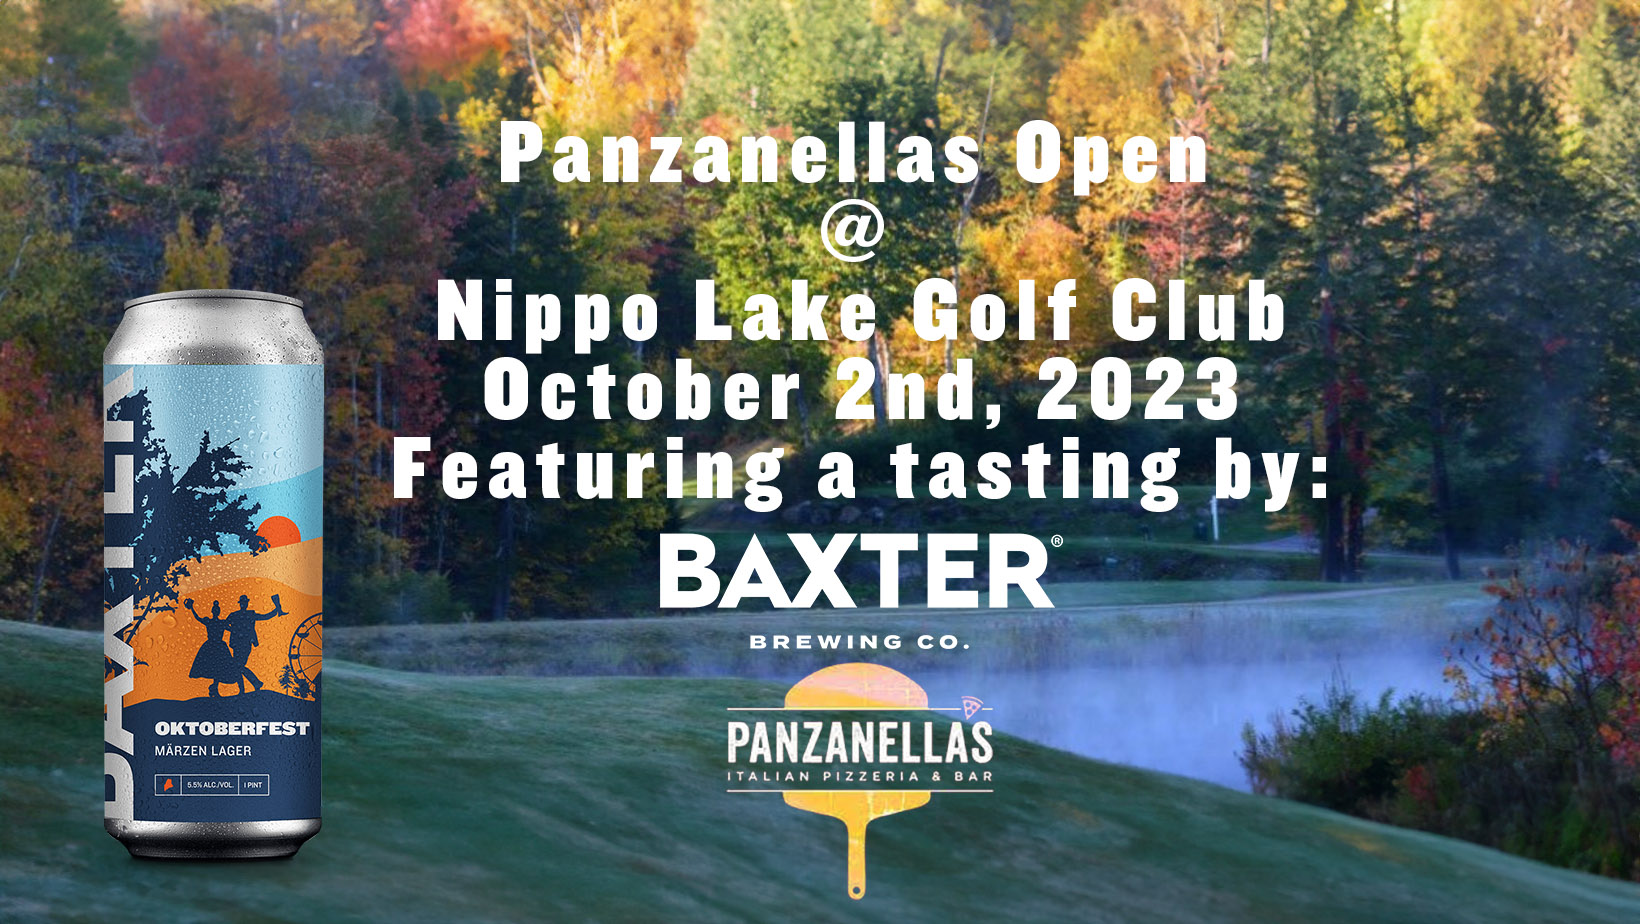 Image promoting a tasting event at the panzanellas golf open